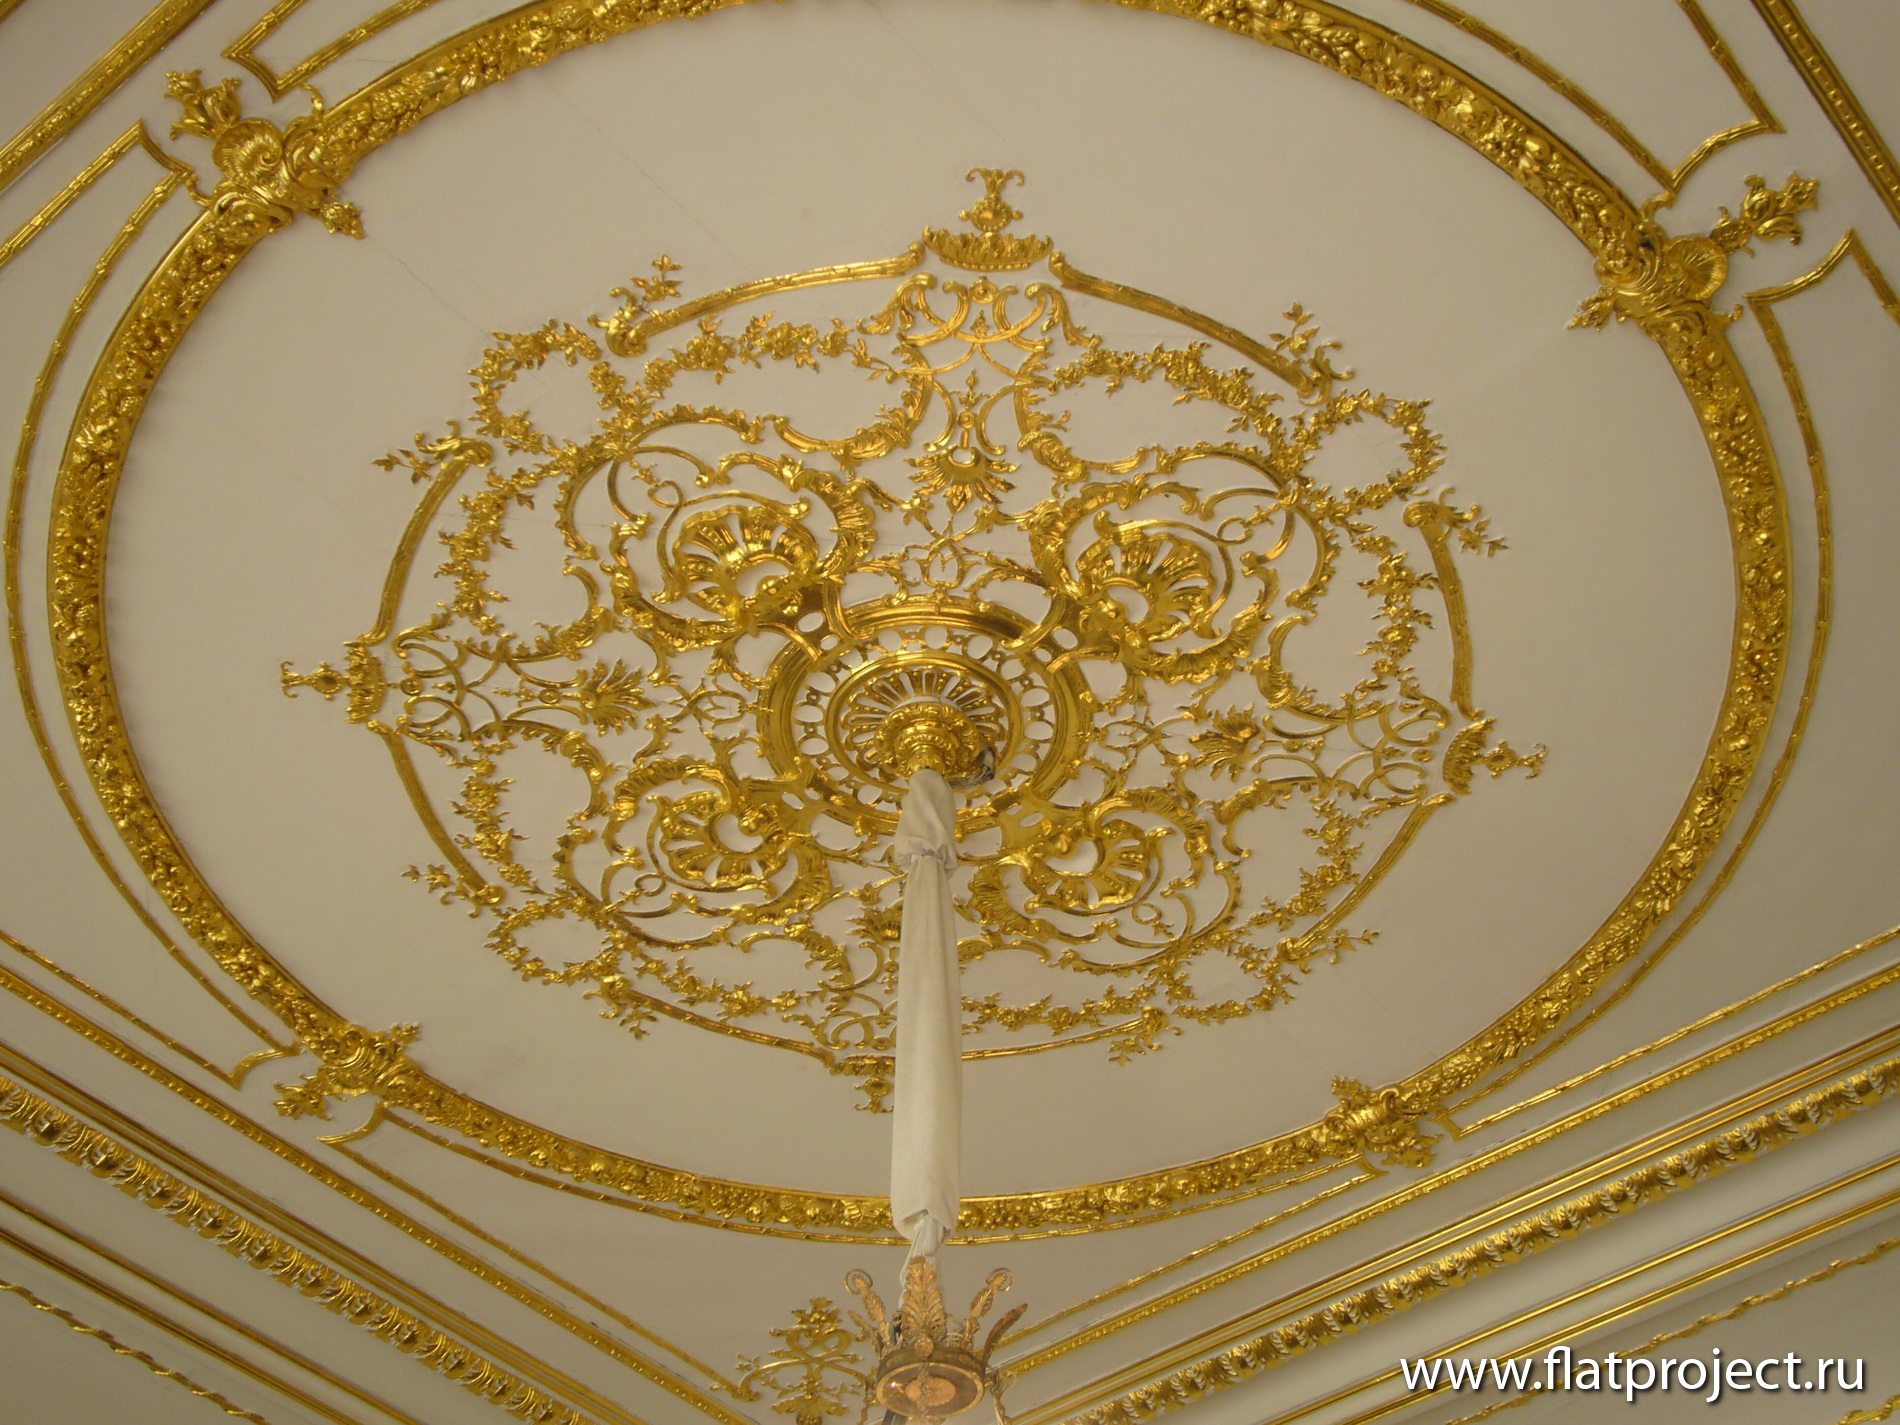 The State Russian museum interiors – photo 35